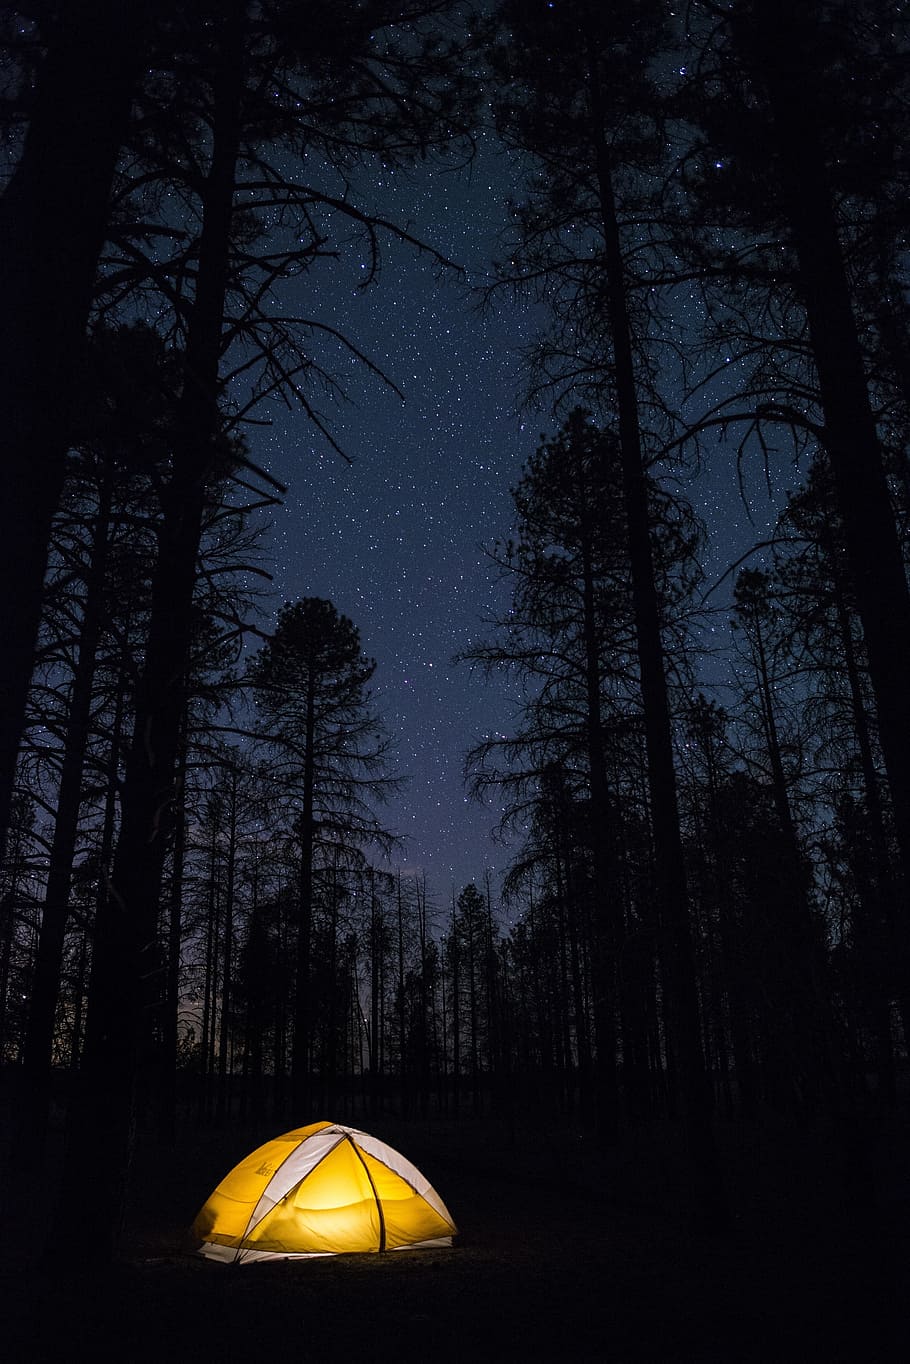 yellow, white, outdoor, tent, tree, night, camping, recreation, lifestyle, fun